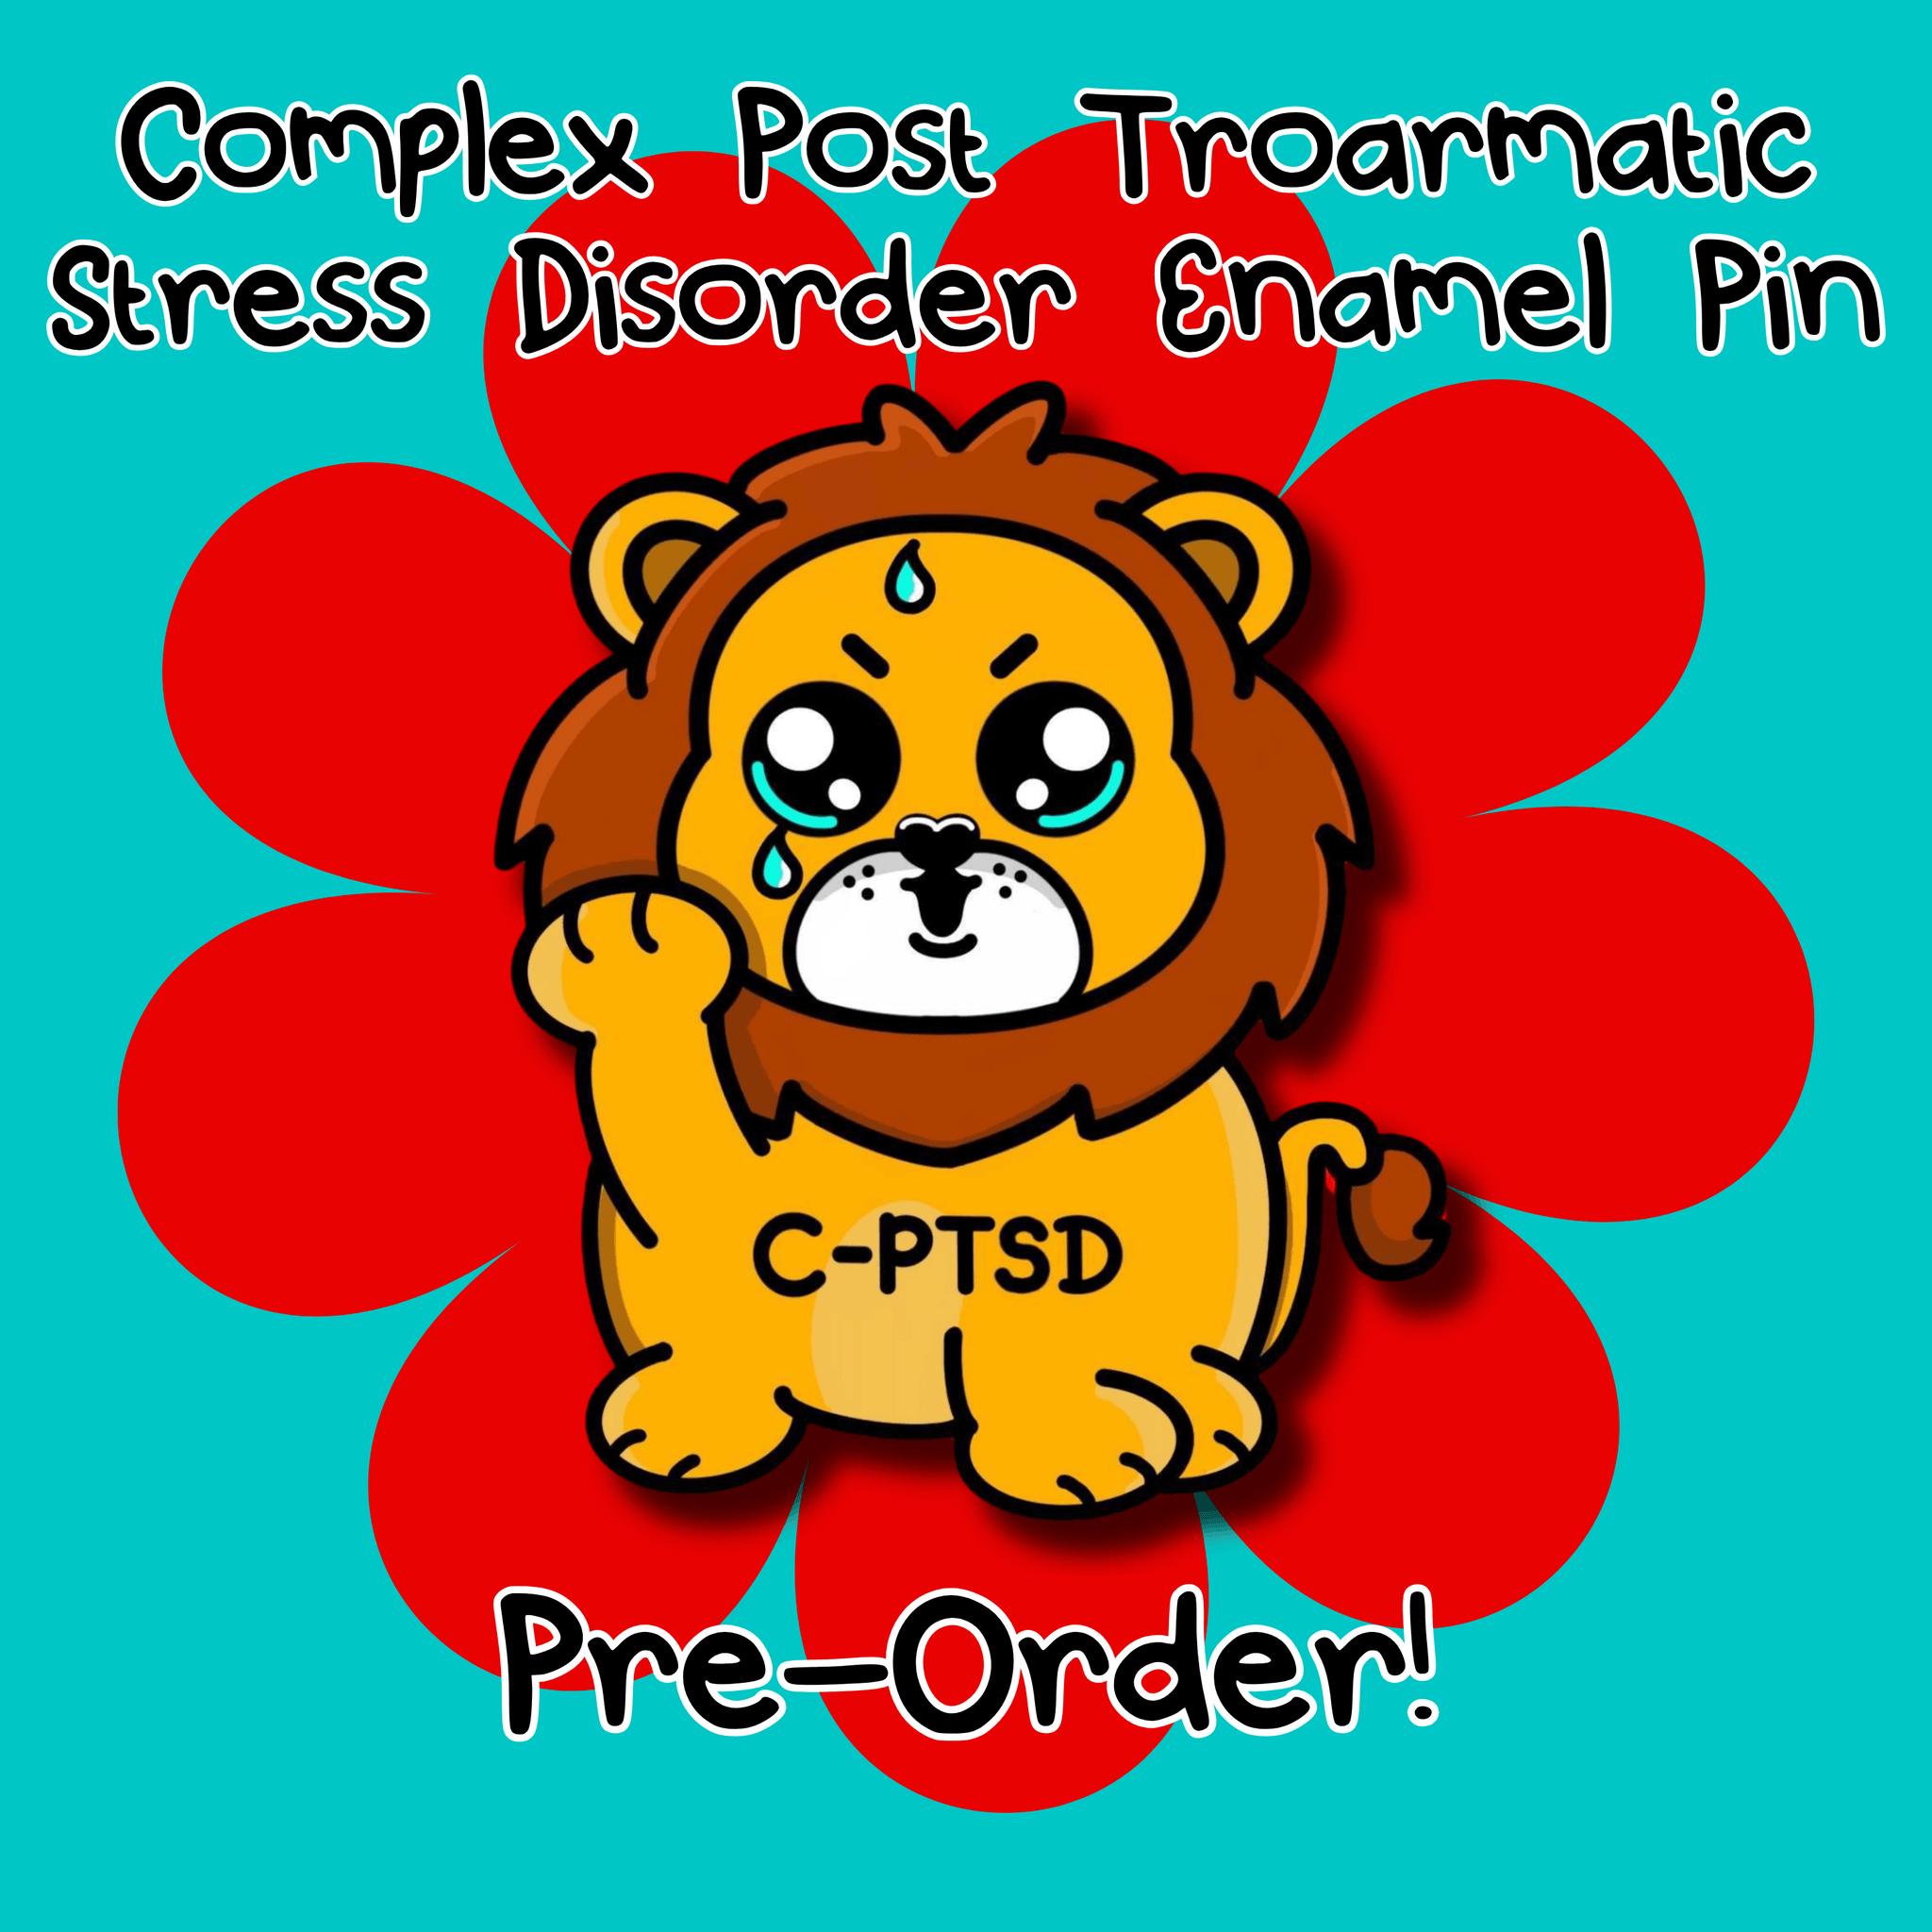 A red and blue graphic background with a yellow crying smiling and sweating male lion with its paw raised in the middle. Above the lion reads 'complex post troarmatic stress disorder enamel pin' and underneath reads 'pre-order!'. Across the lions chest is C-PTSD. The enamel pin design is raising awareness for complex post traumatic stress disorder.